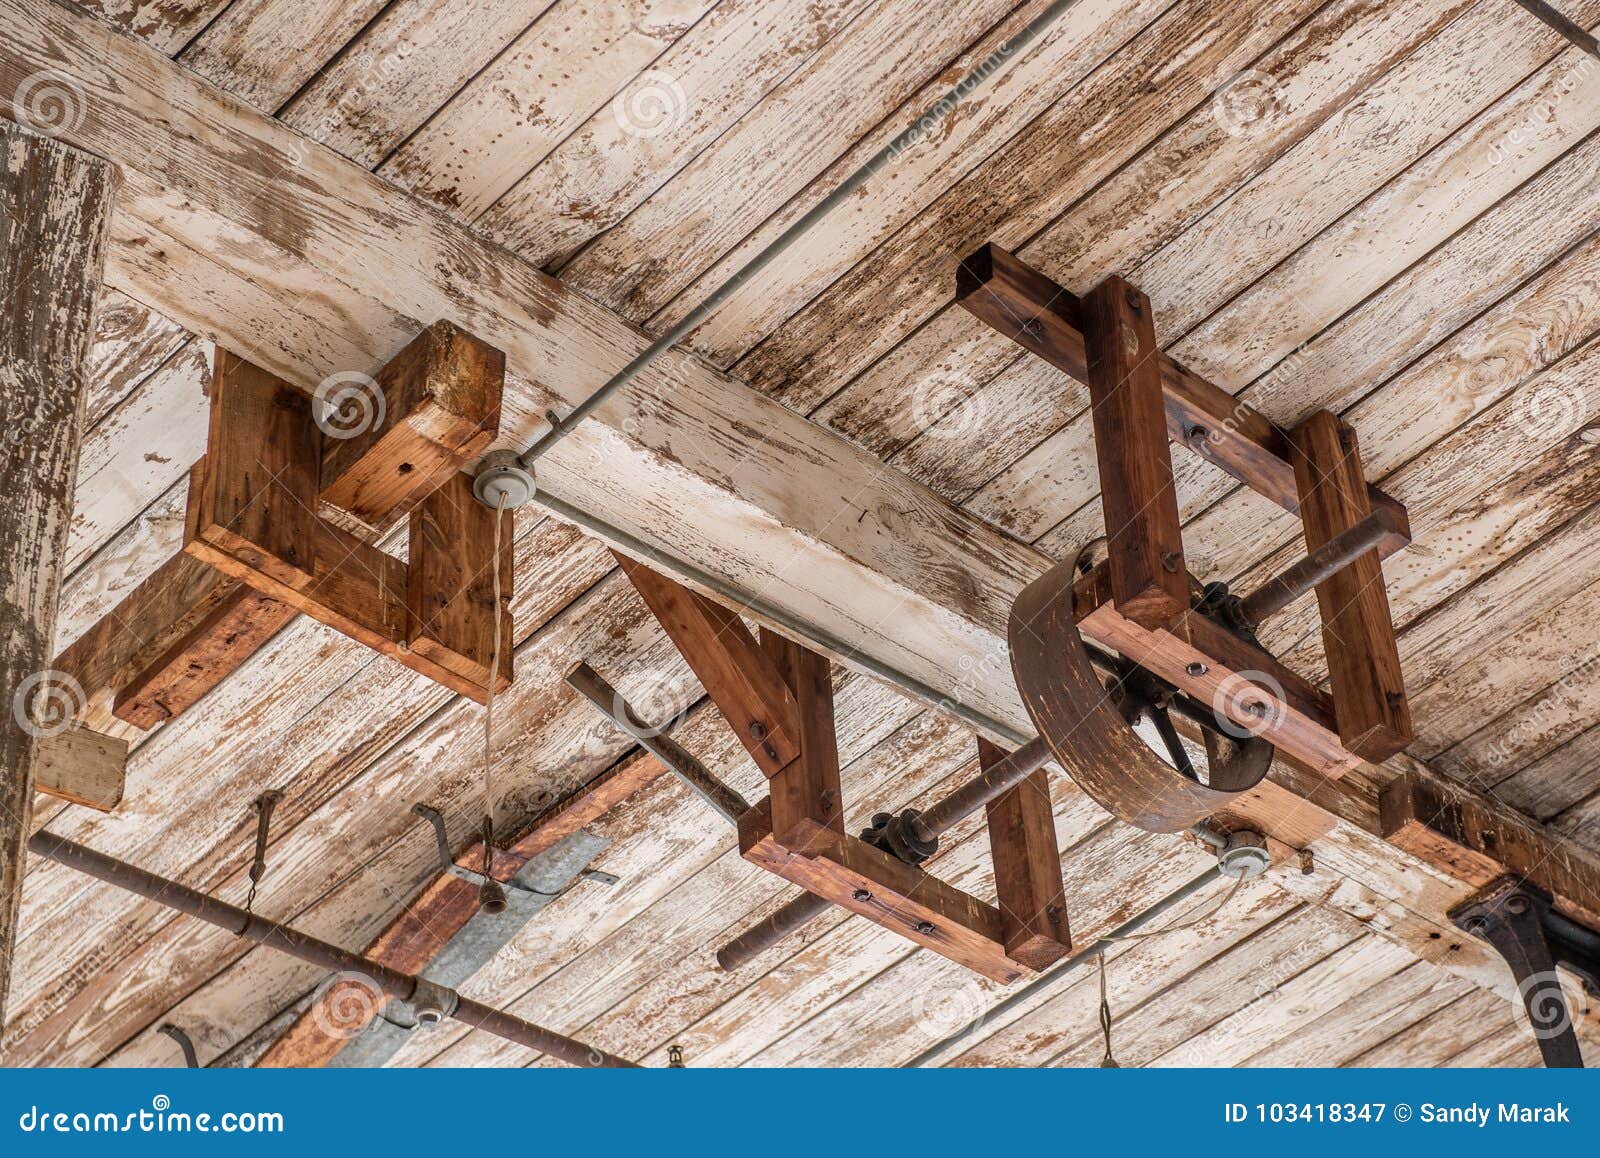 Old Ceiling With Wheel And Beam With Peeling Paint Stock Image